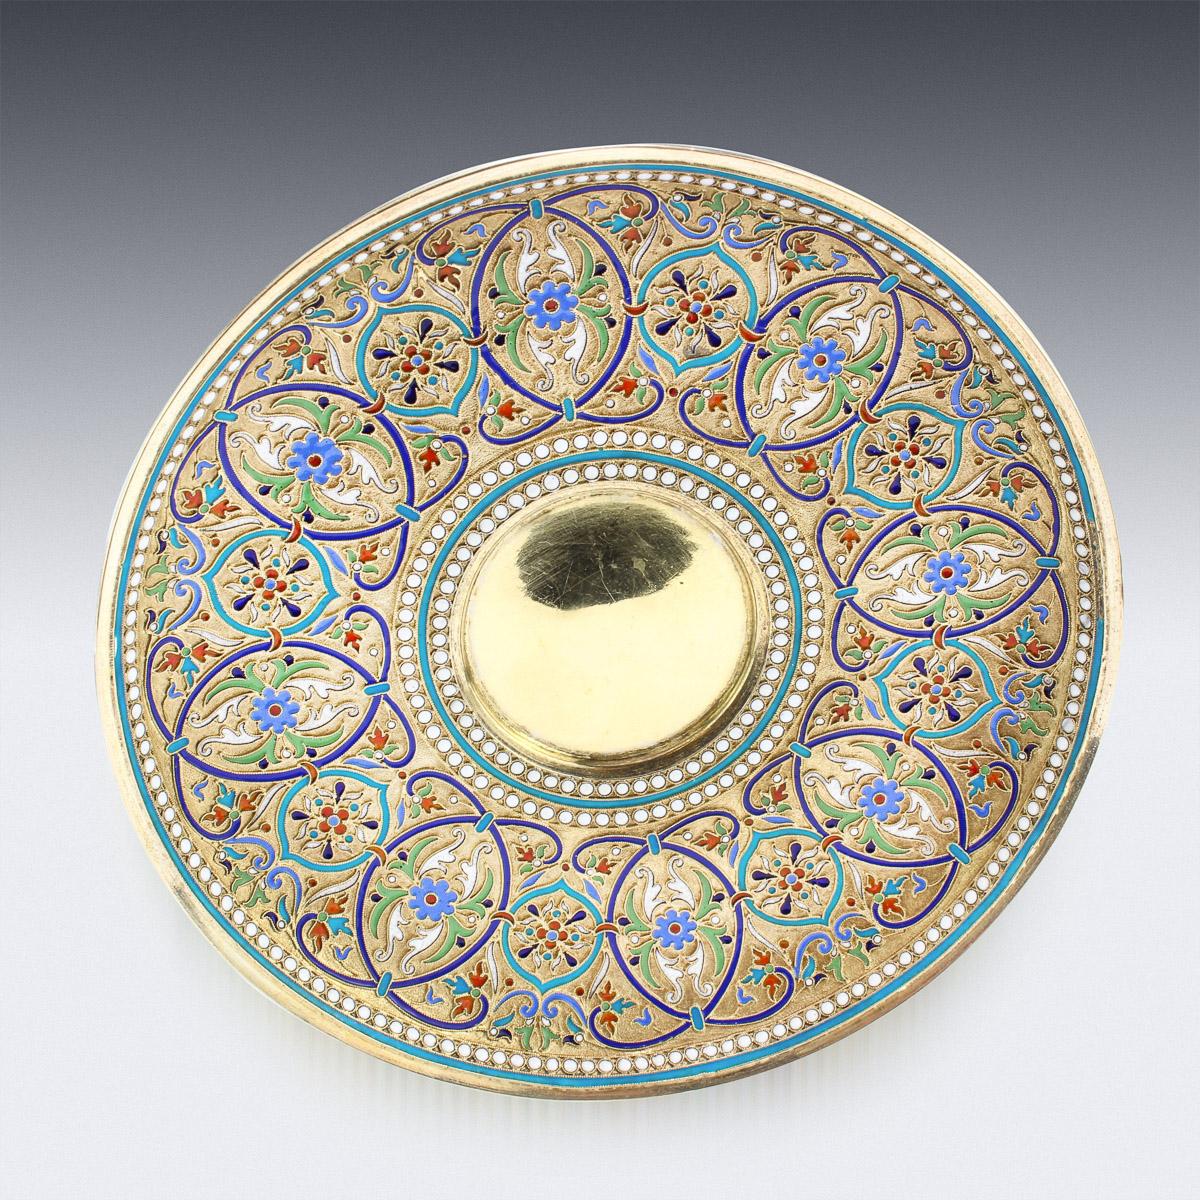 19th Century Imperial Russian Solid Silver-Gilt & Enamel Cup on Saucer, c.1887 3